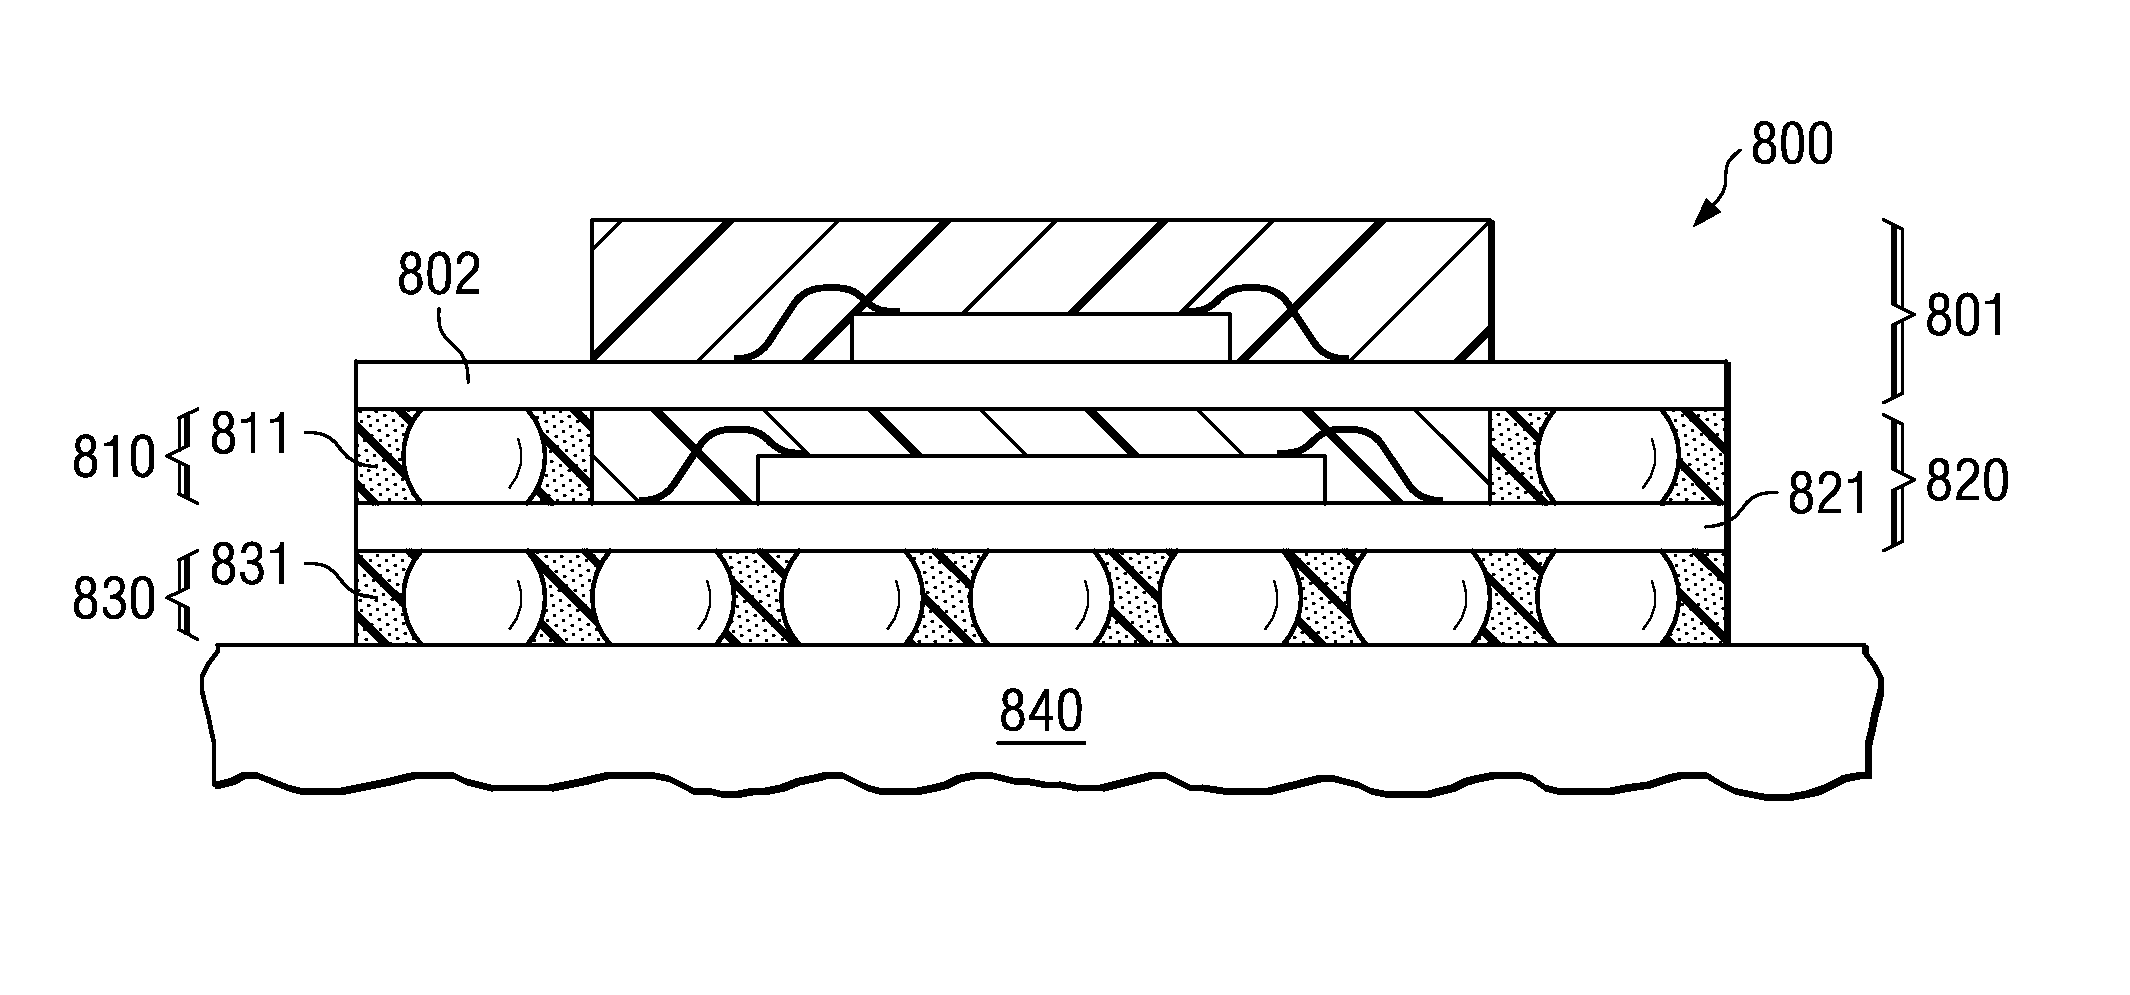 Flip-attached and underfilled stacked semiconductor devices